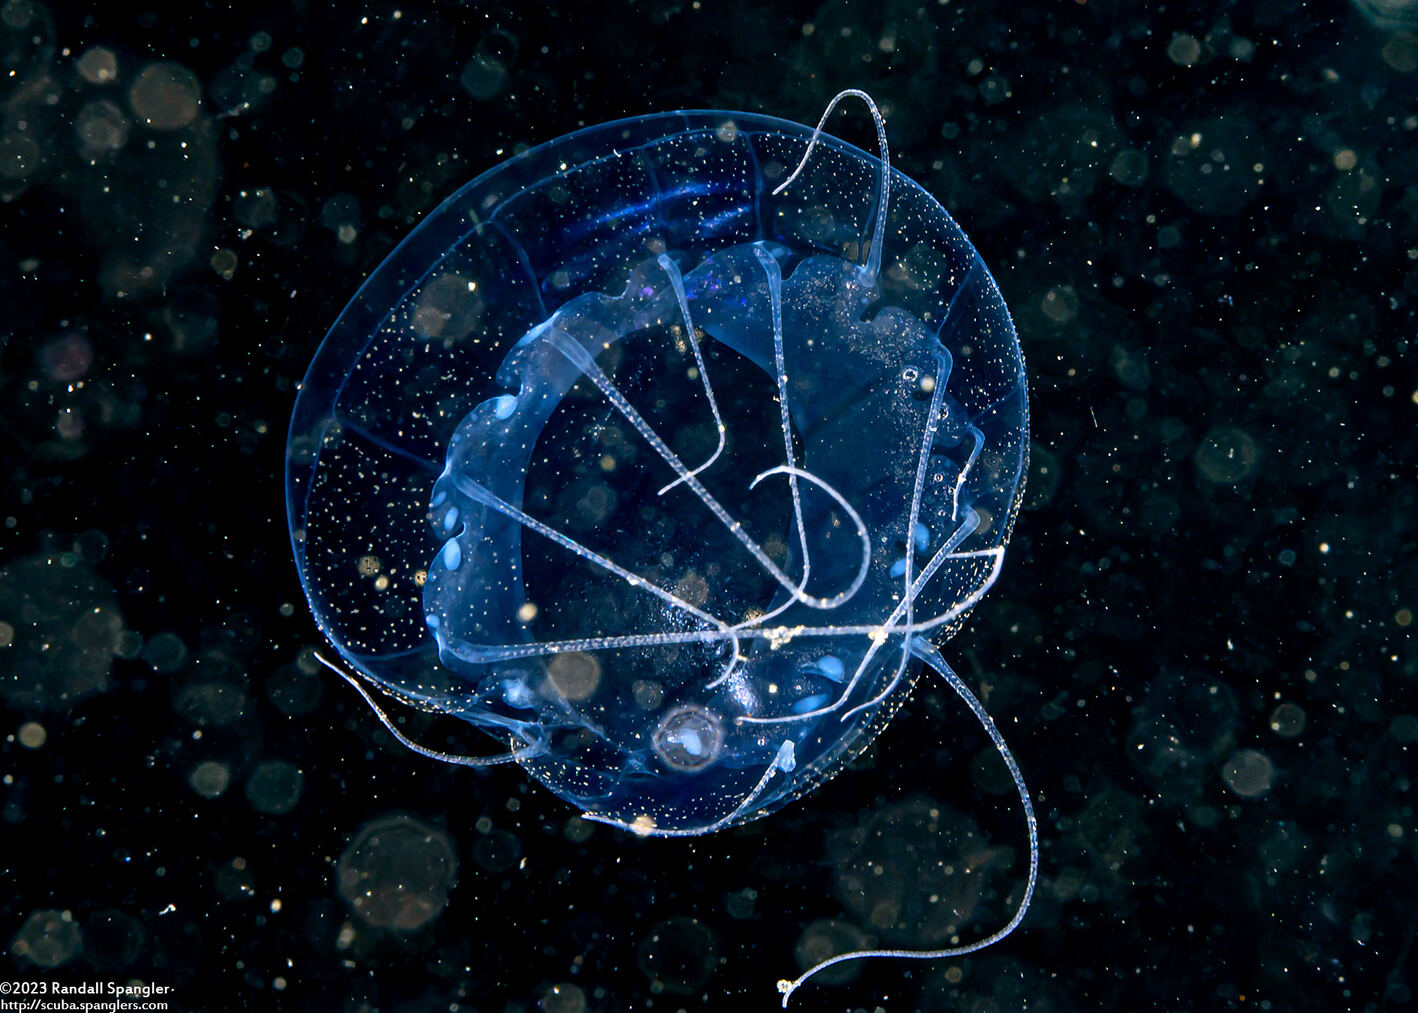 Solmissus sp.1 (Dinner Plate Jelly)